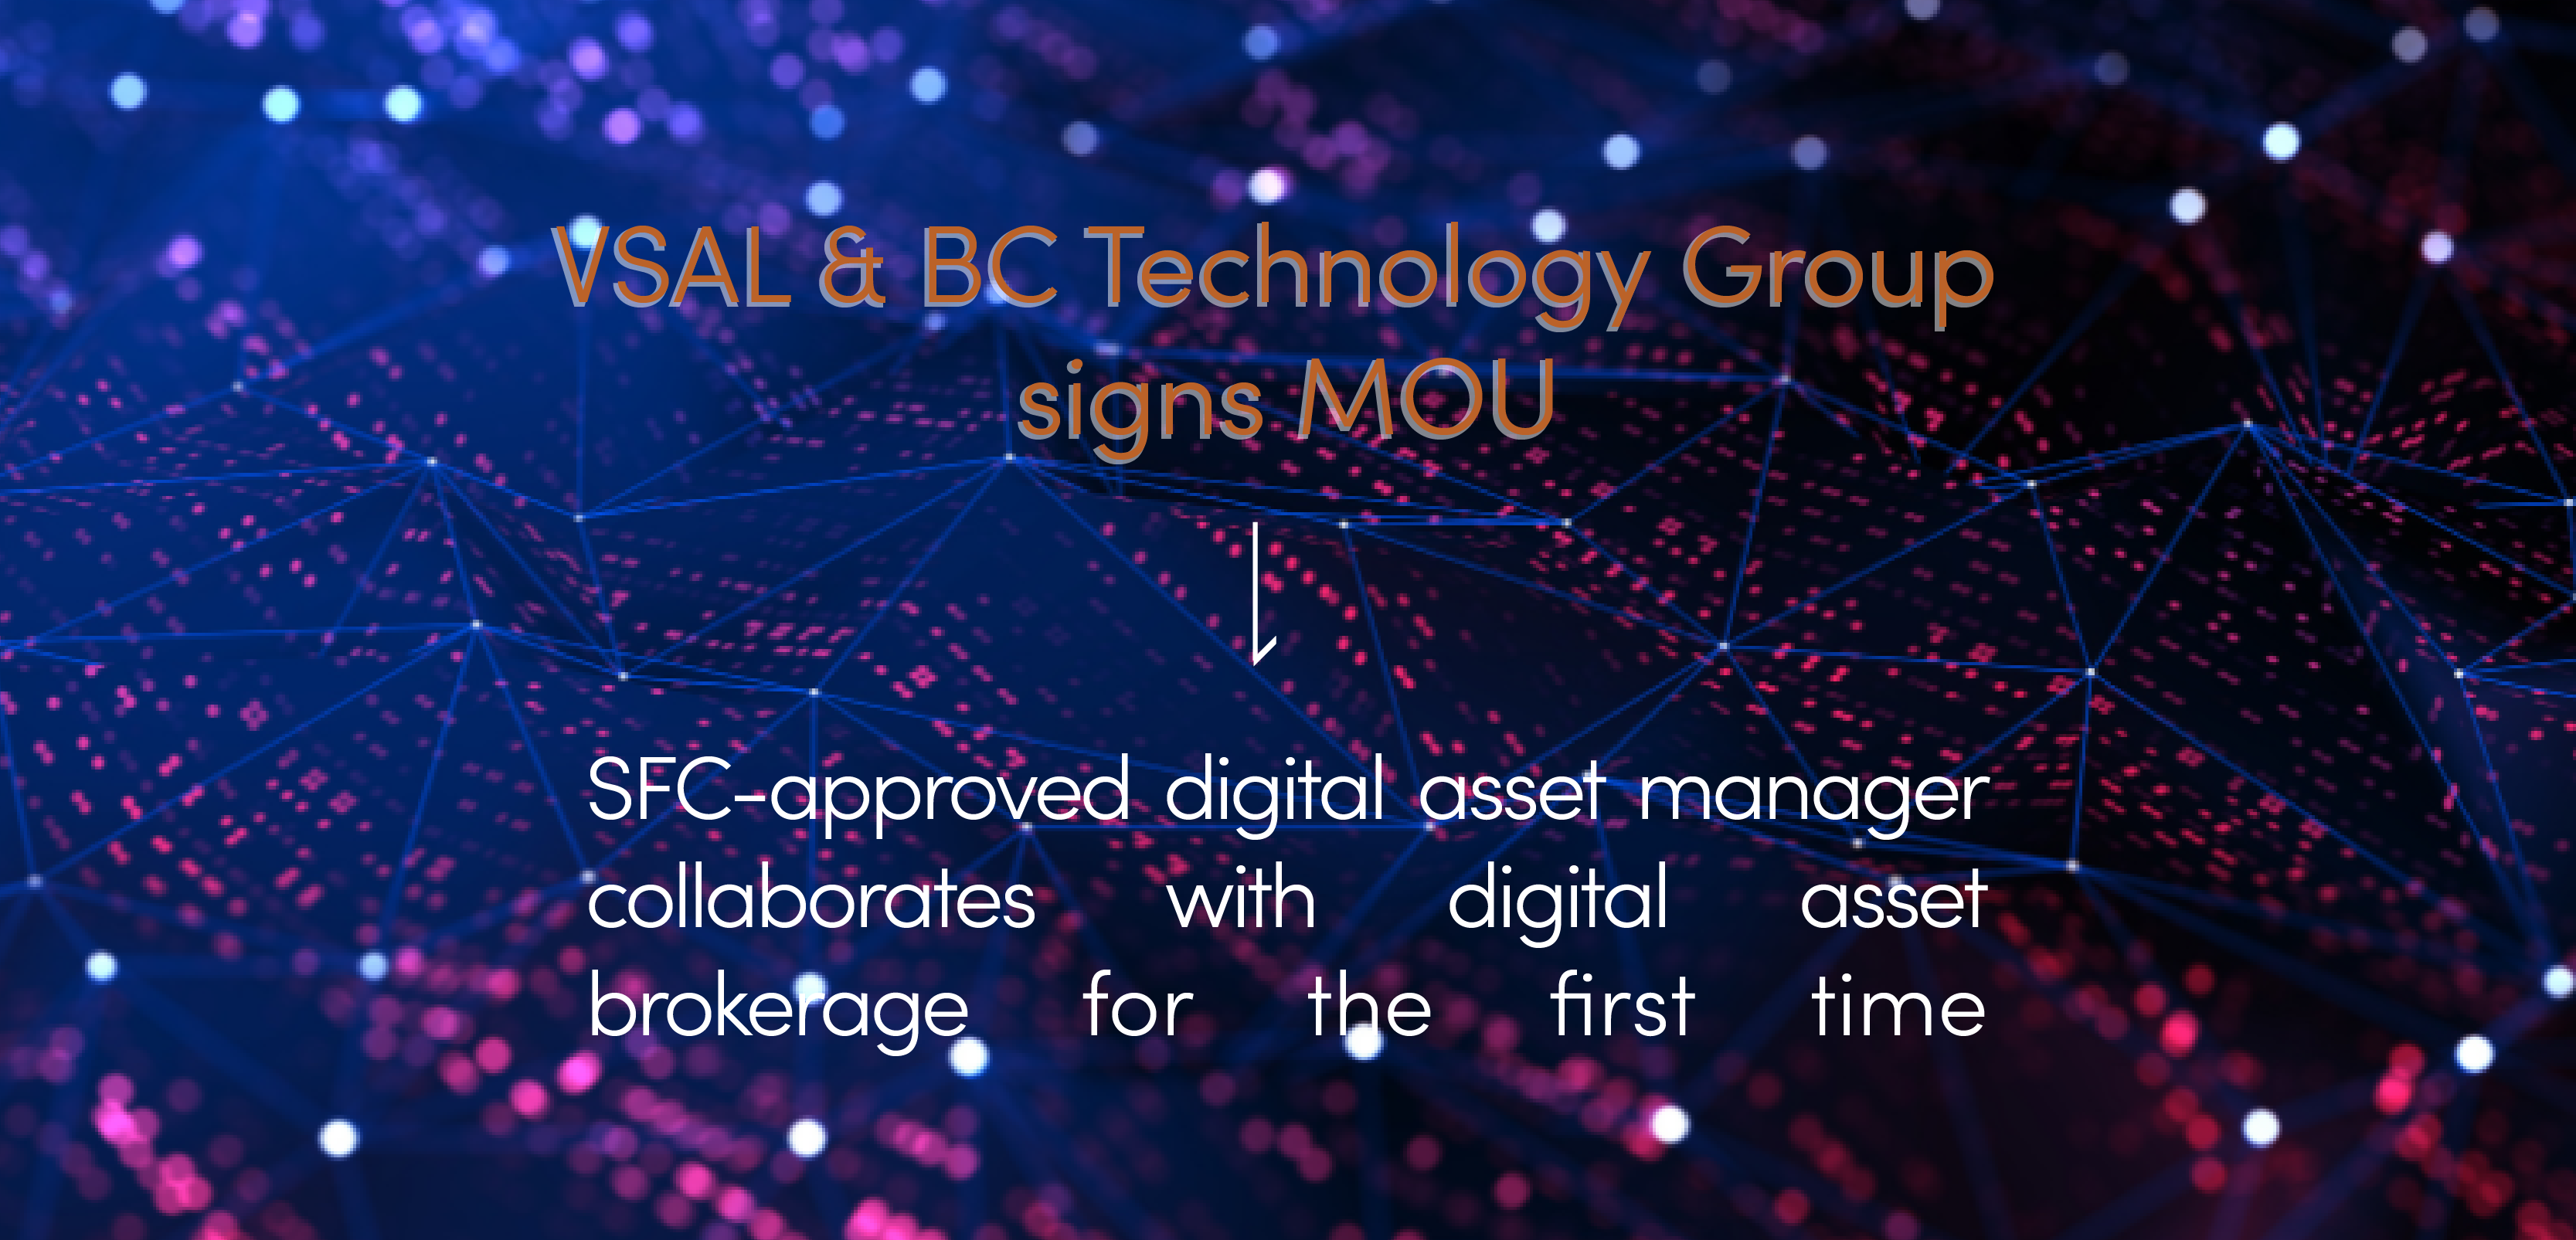 bc-technology-group-and-venture-smart-asia-limited-sign-mou-osl-to-be-brokerage-partner-for-hk-regulated-digital-asset-funds